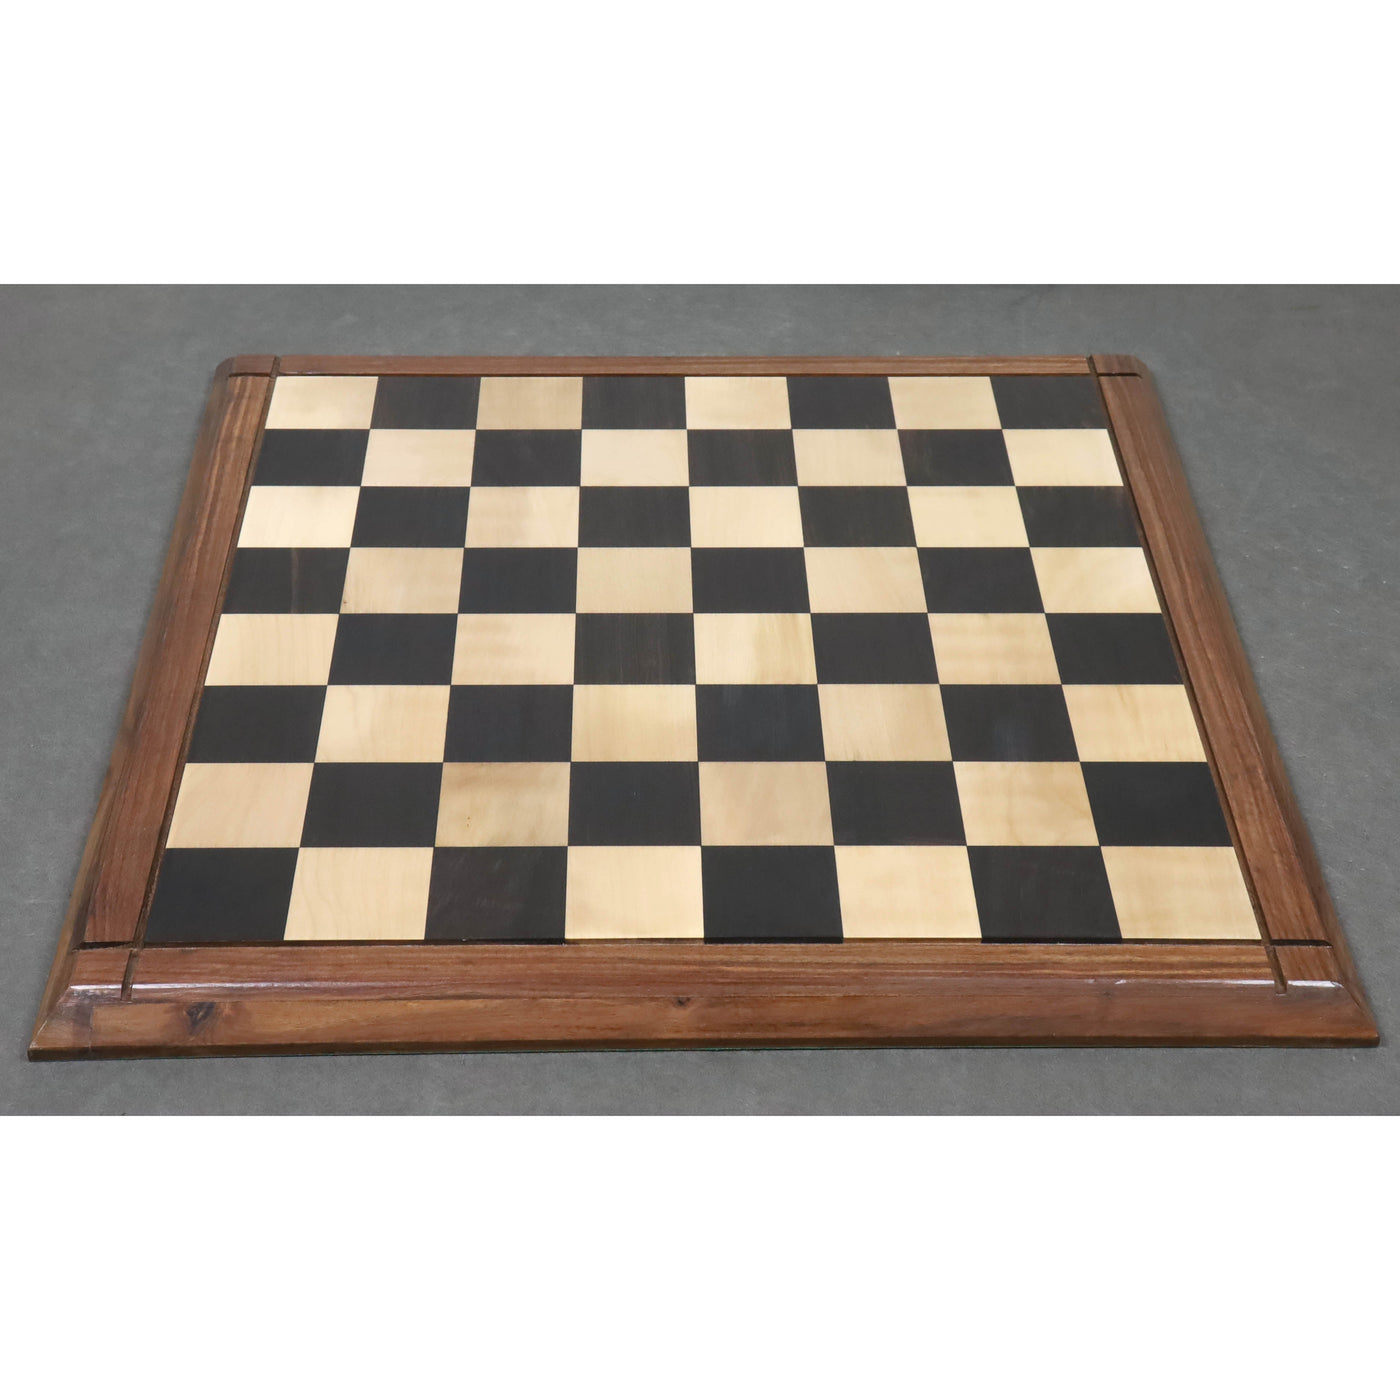 Combo of 3.9" Craftsman Series Staunton Chess Set - Pieces in Ebony Wood with Board and Box